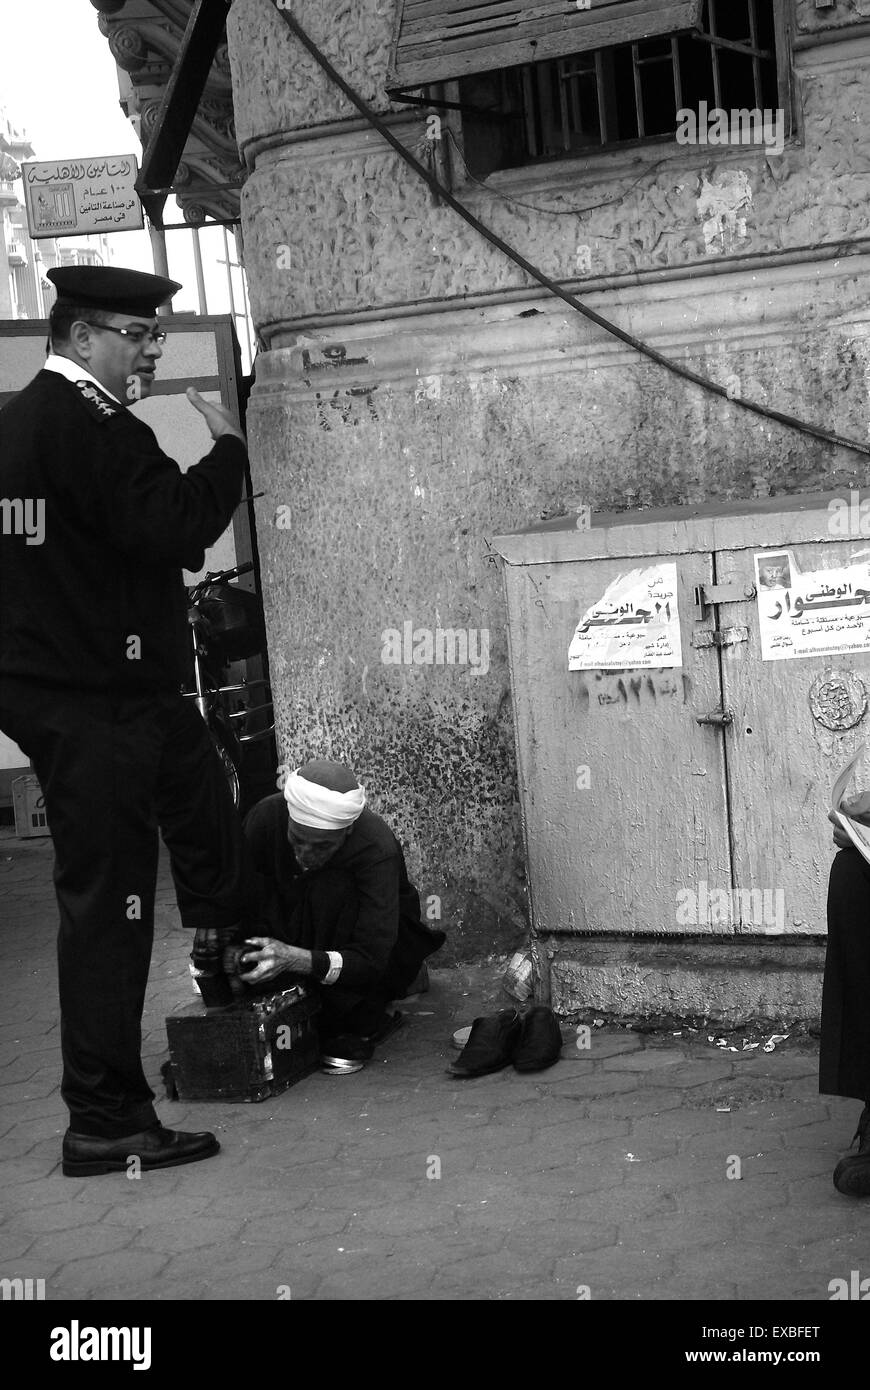 Policeman getting his shoes cleaned, Cairo, Egypt Stock Photo